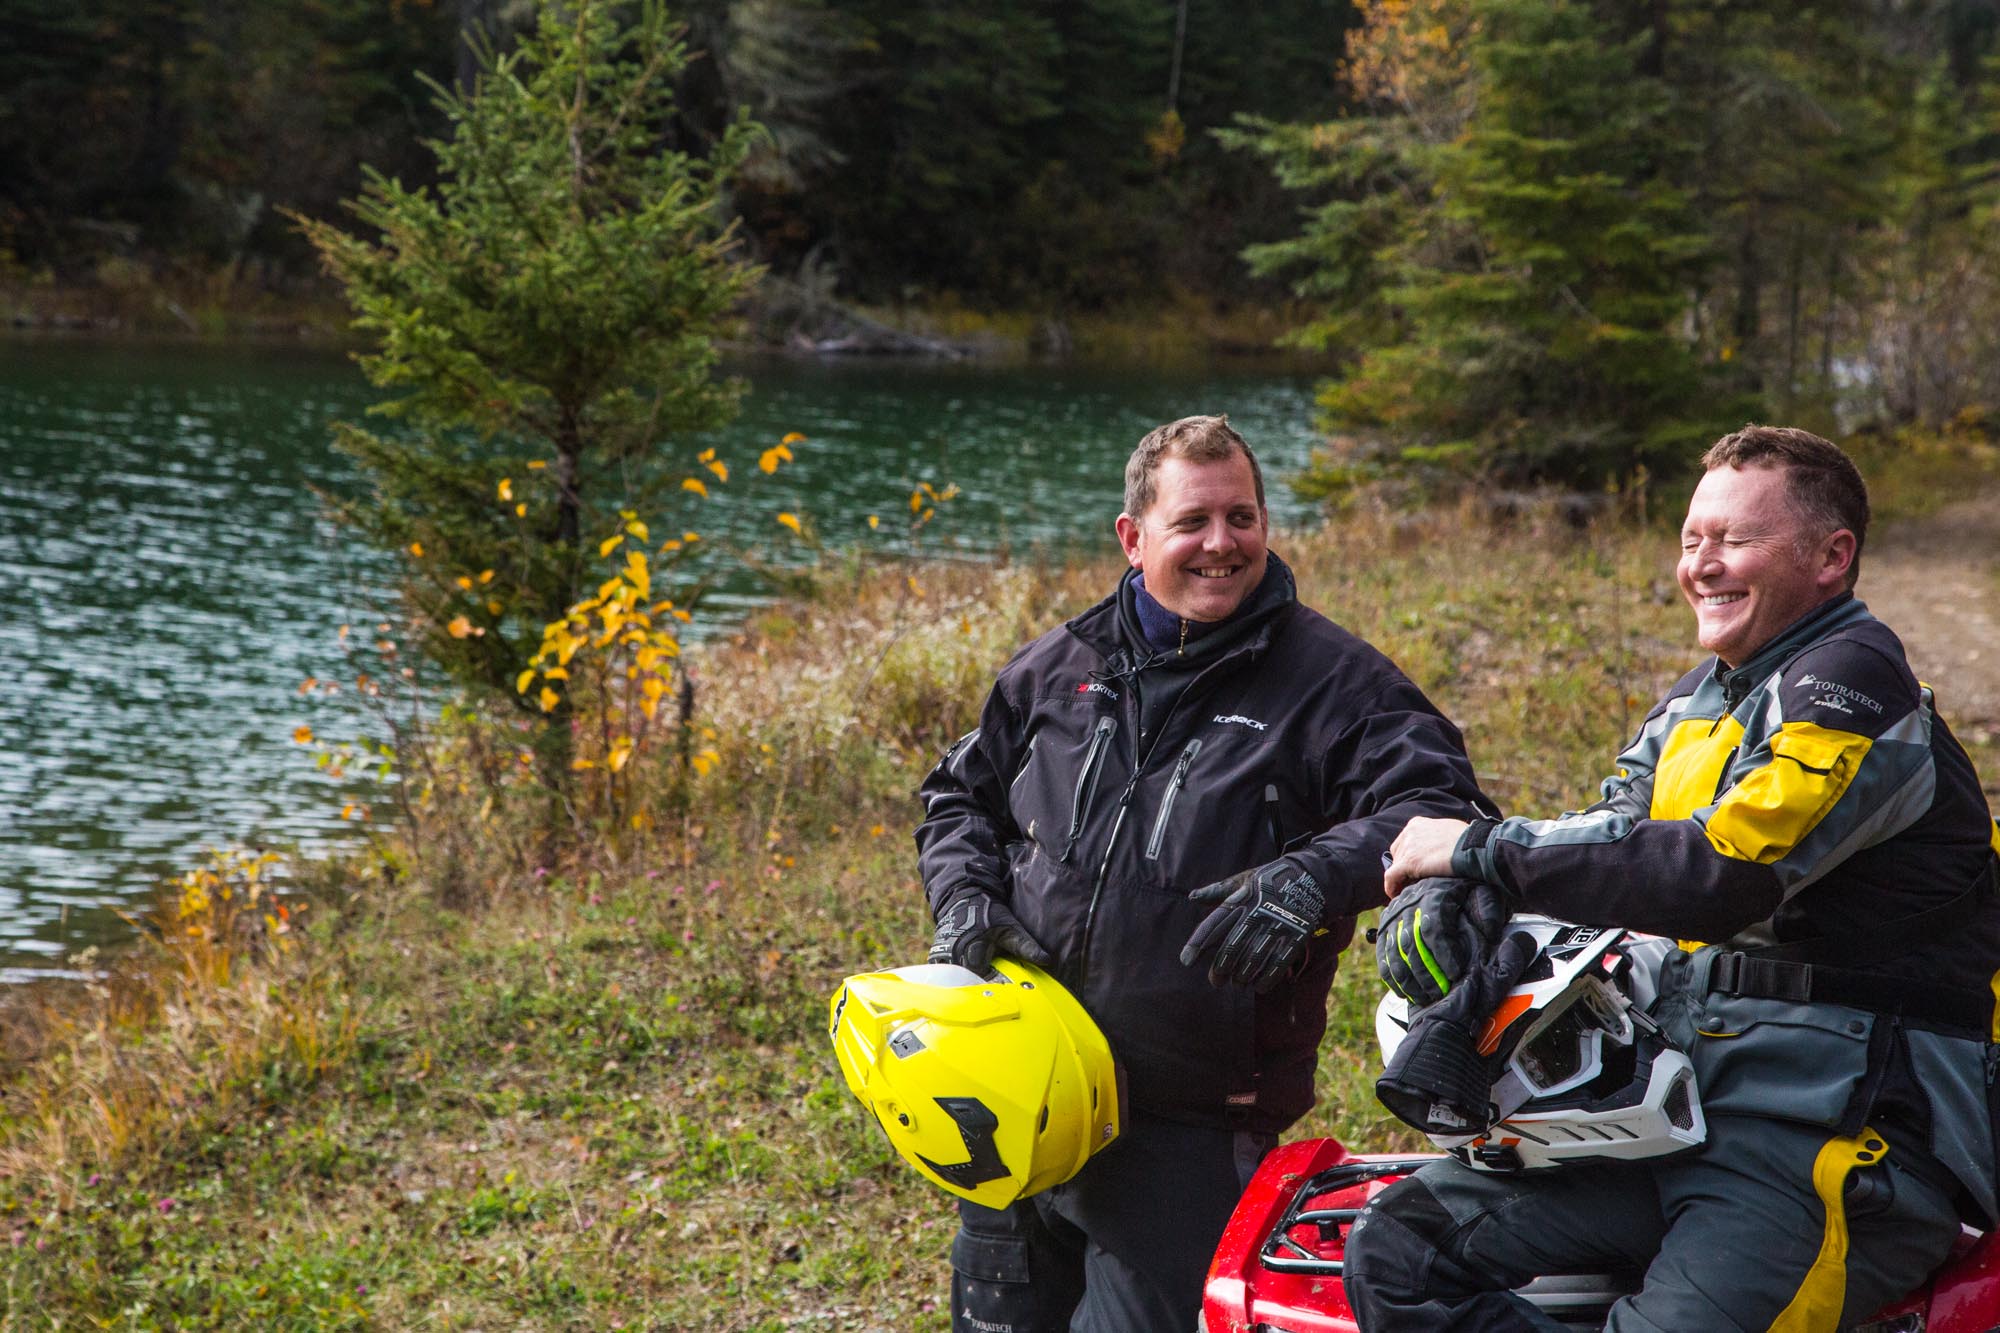 Two ATV riders talking and laughing while they are parked next to a lake surrounded by forest.